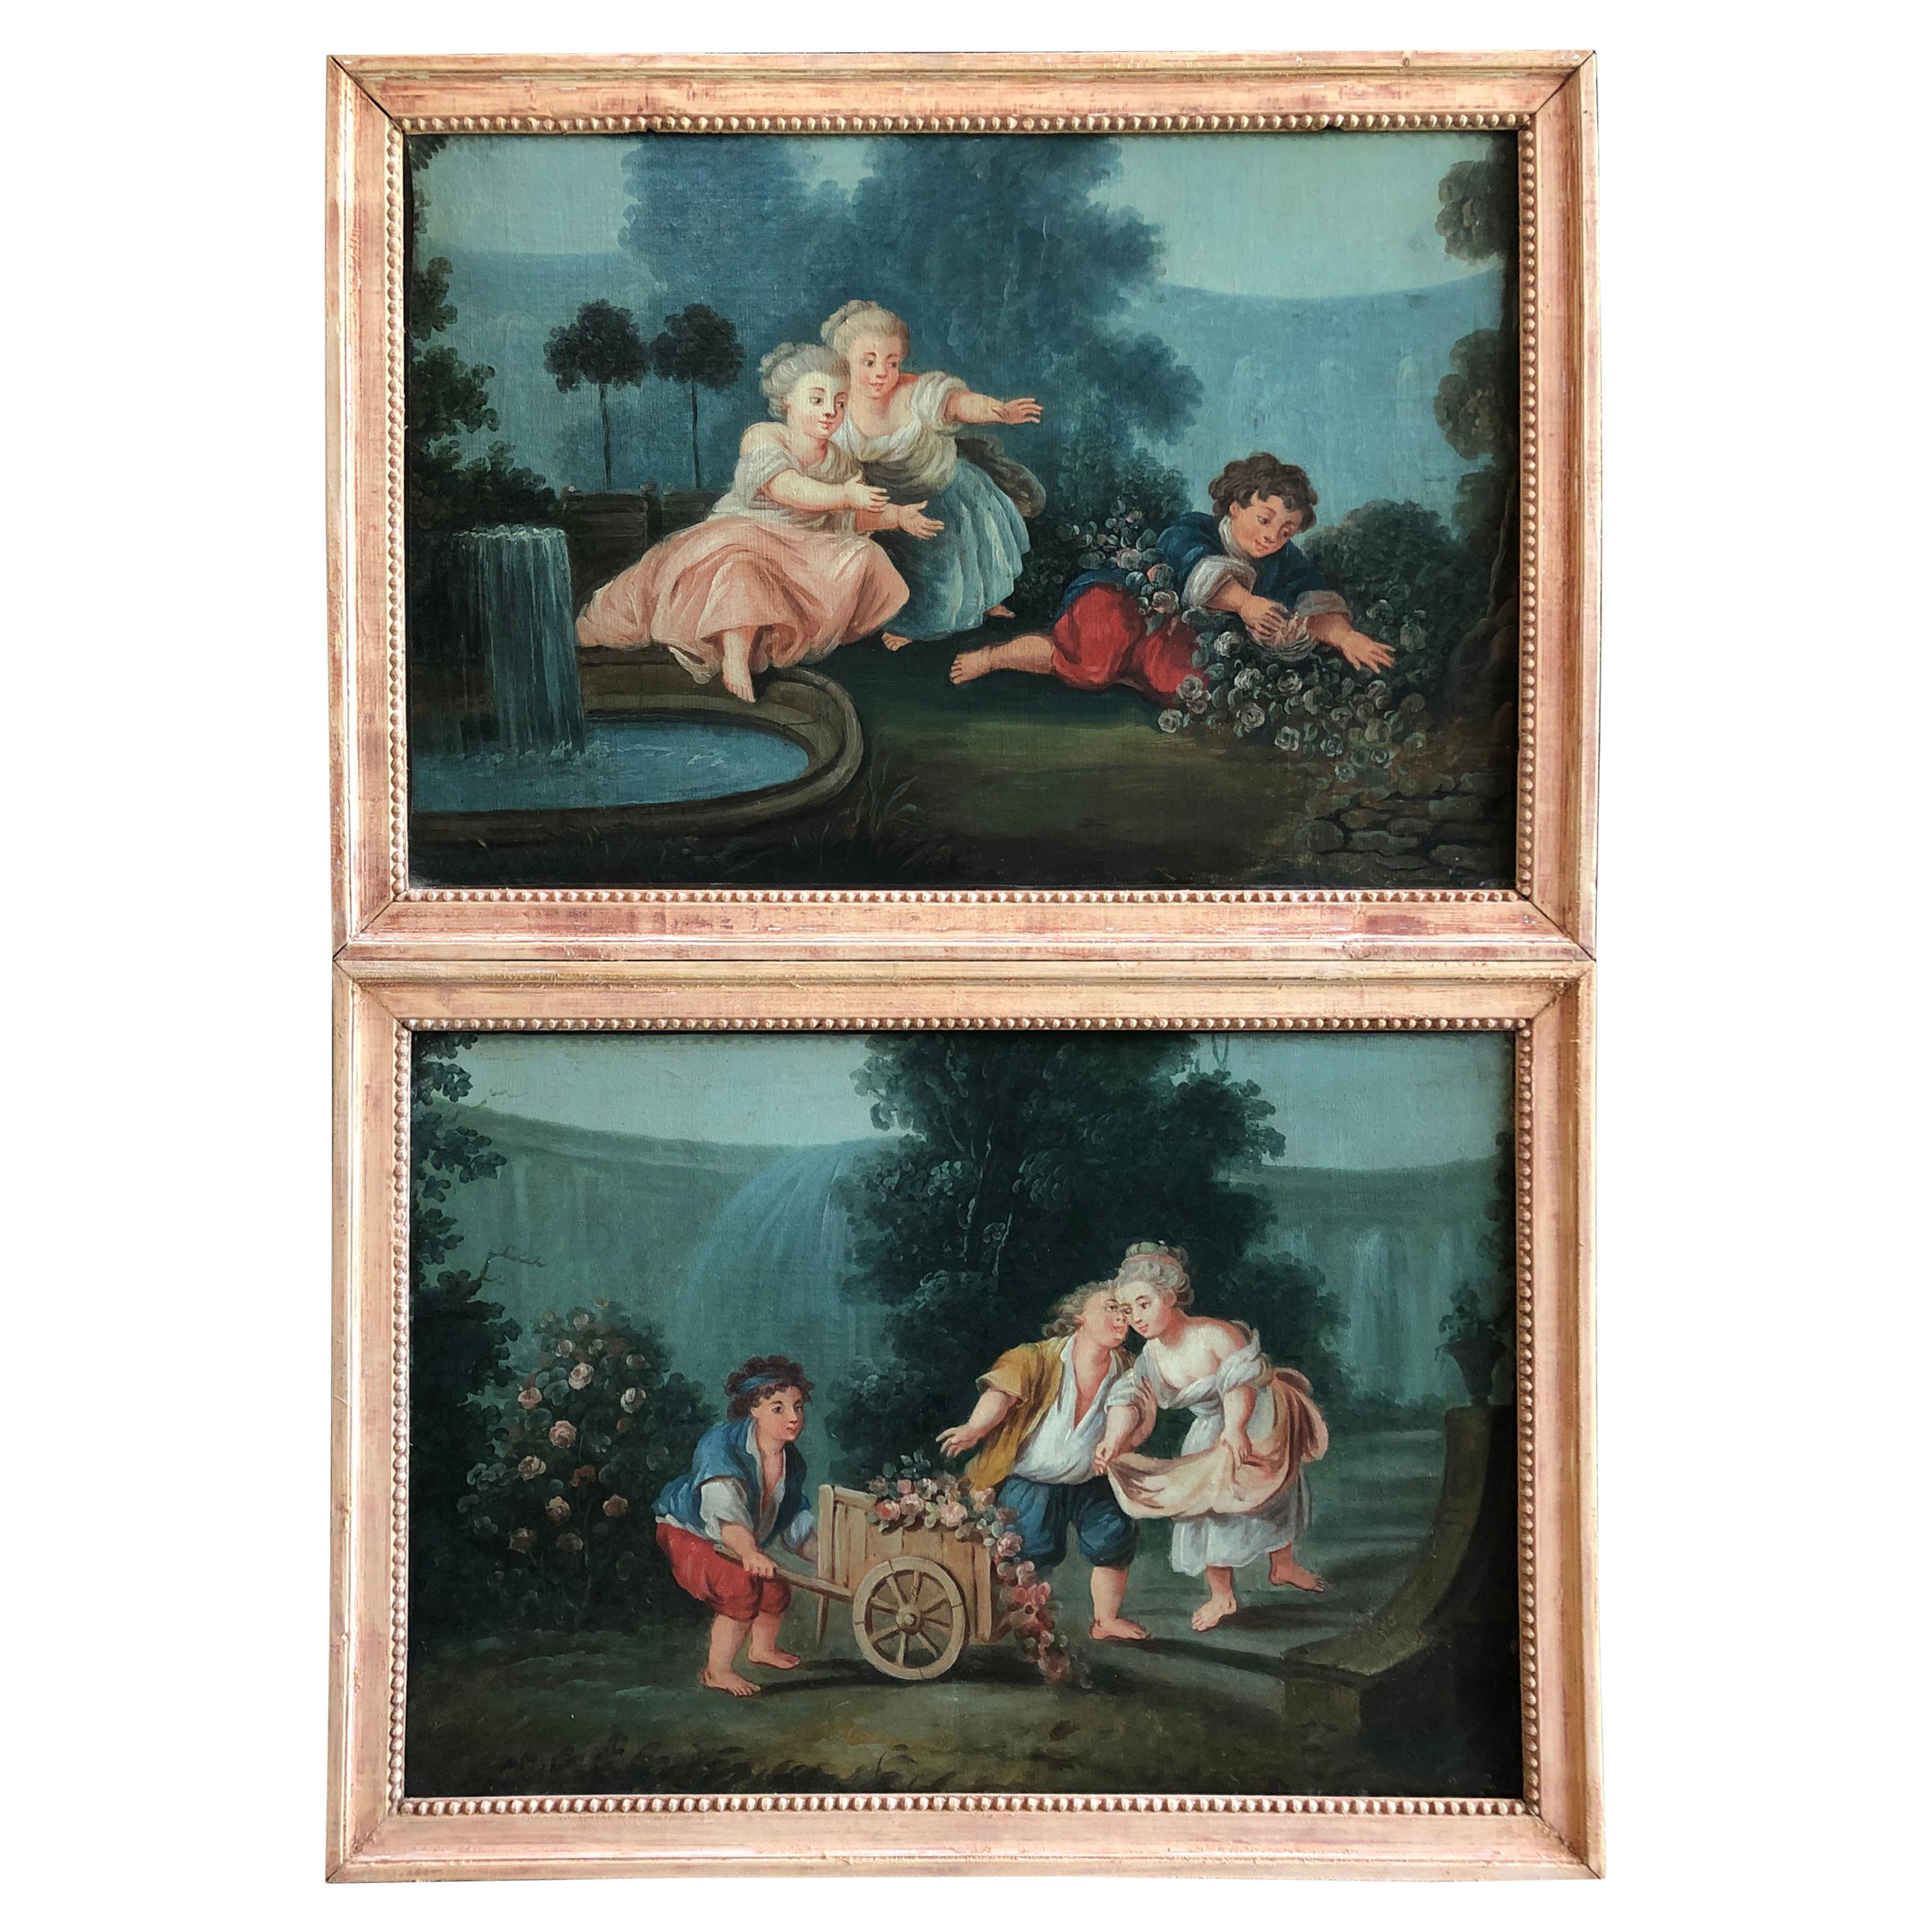 Pair of Naive French Paintings, Garden Theme, 18th C.